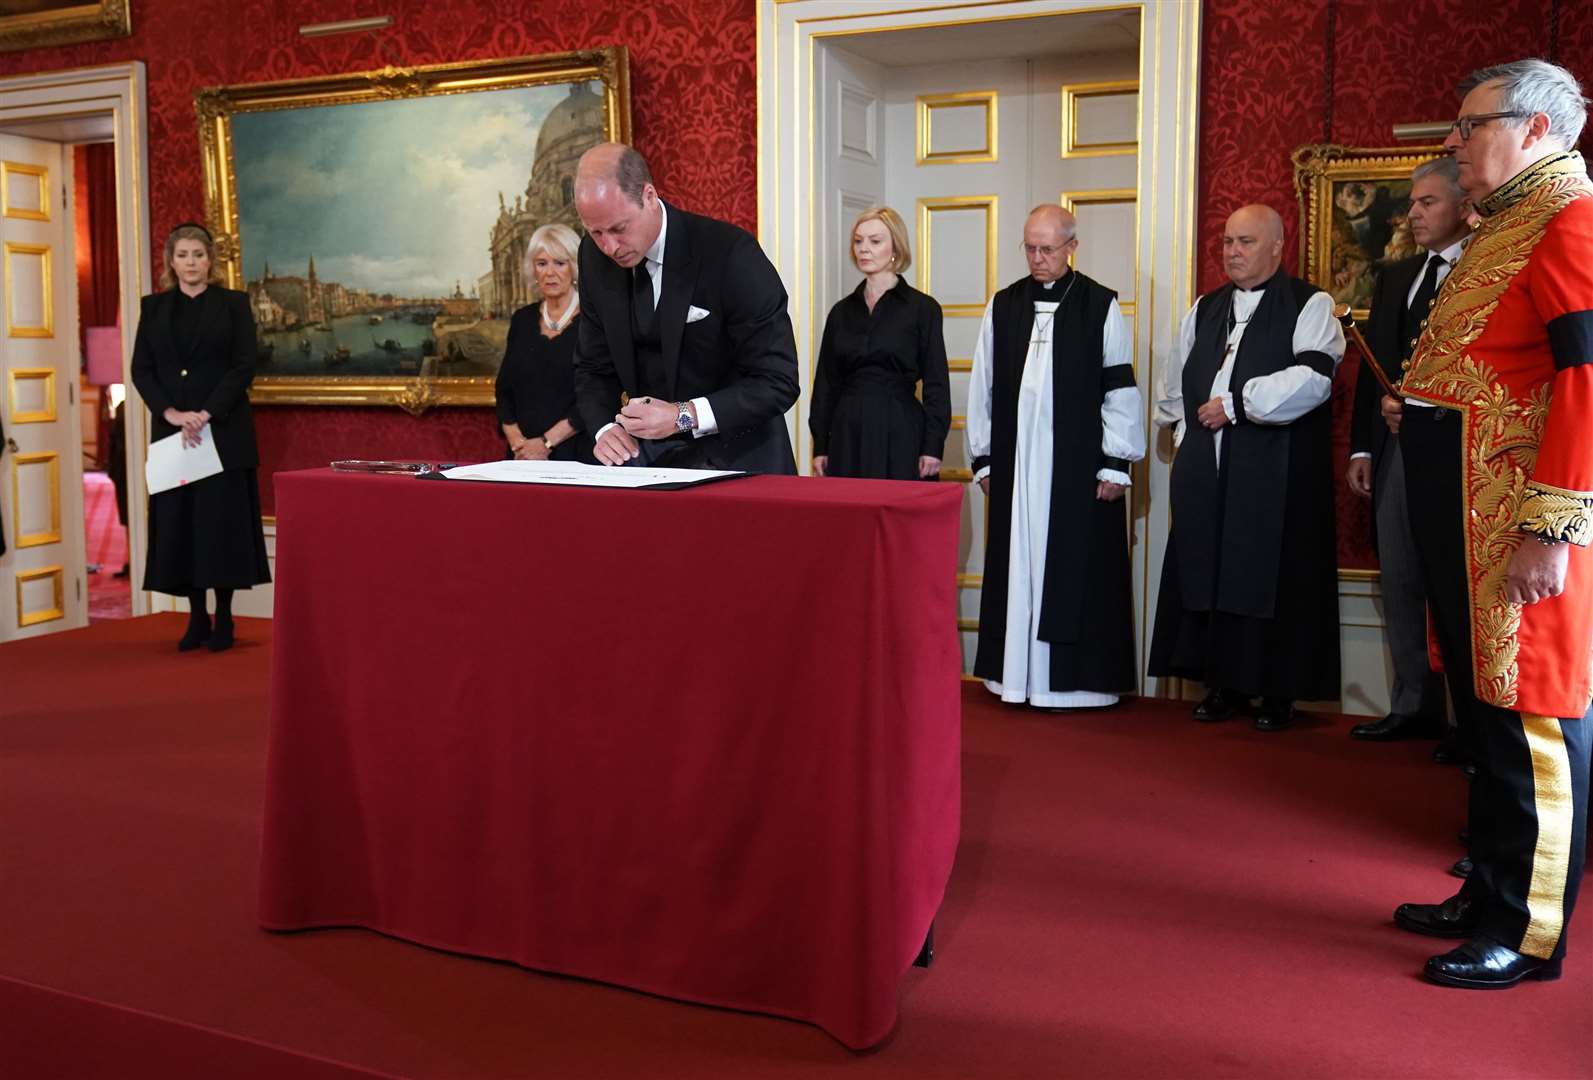 Earl Marshal, Edward Fitzalan-Howard, the Duke of Norfolk, on the right, watches as the Prince of Wales signs the Proclamation of Accession of King Charles III (Kirsty O’Connor/PA)